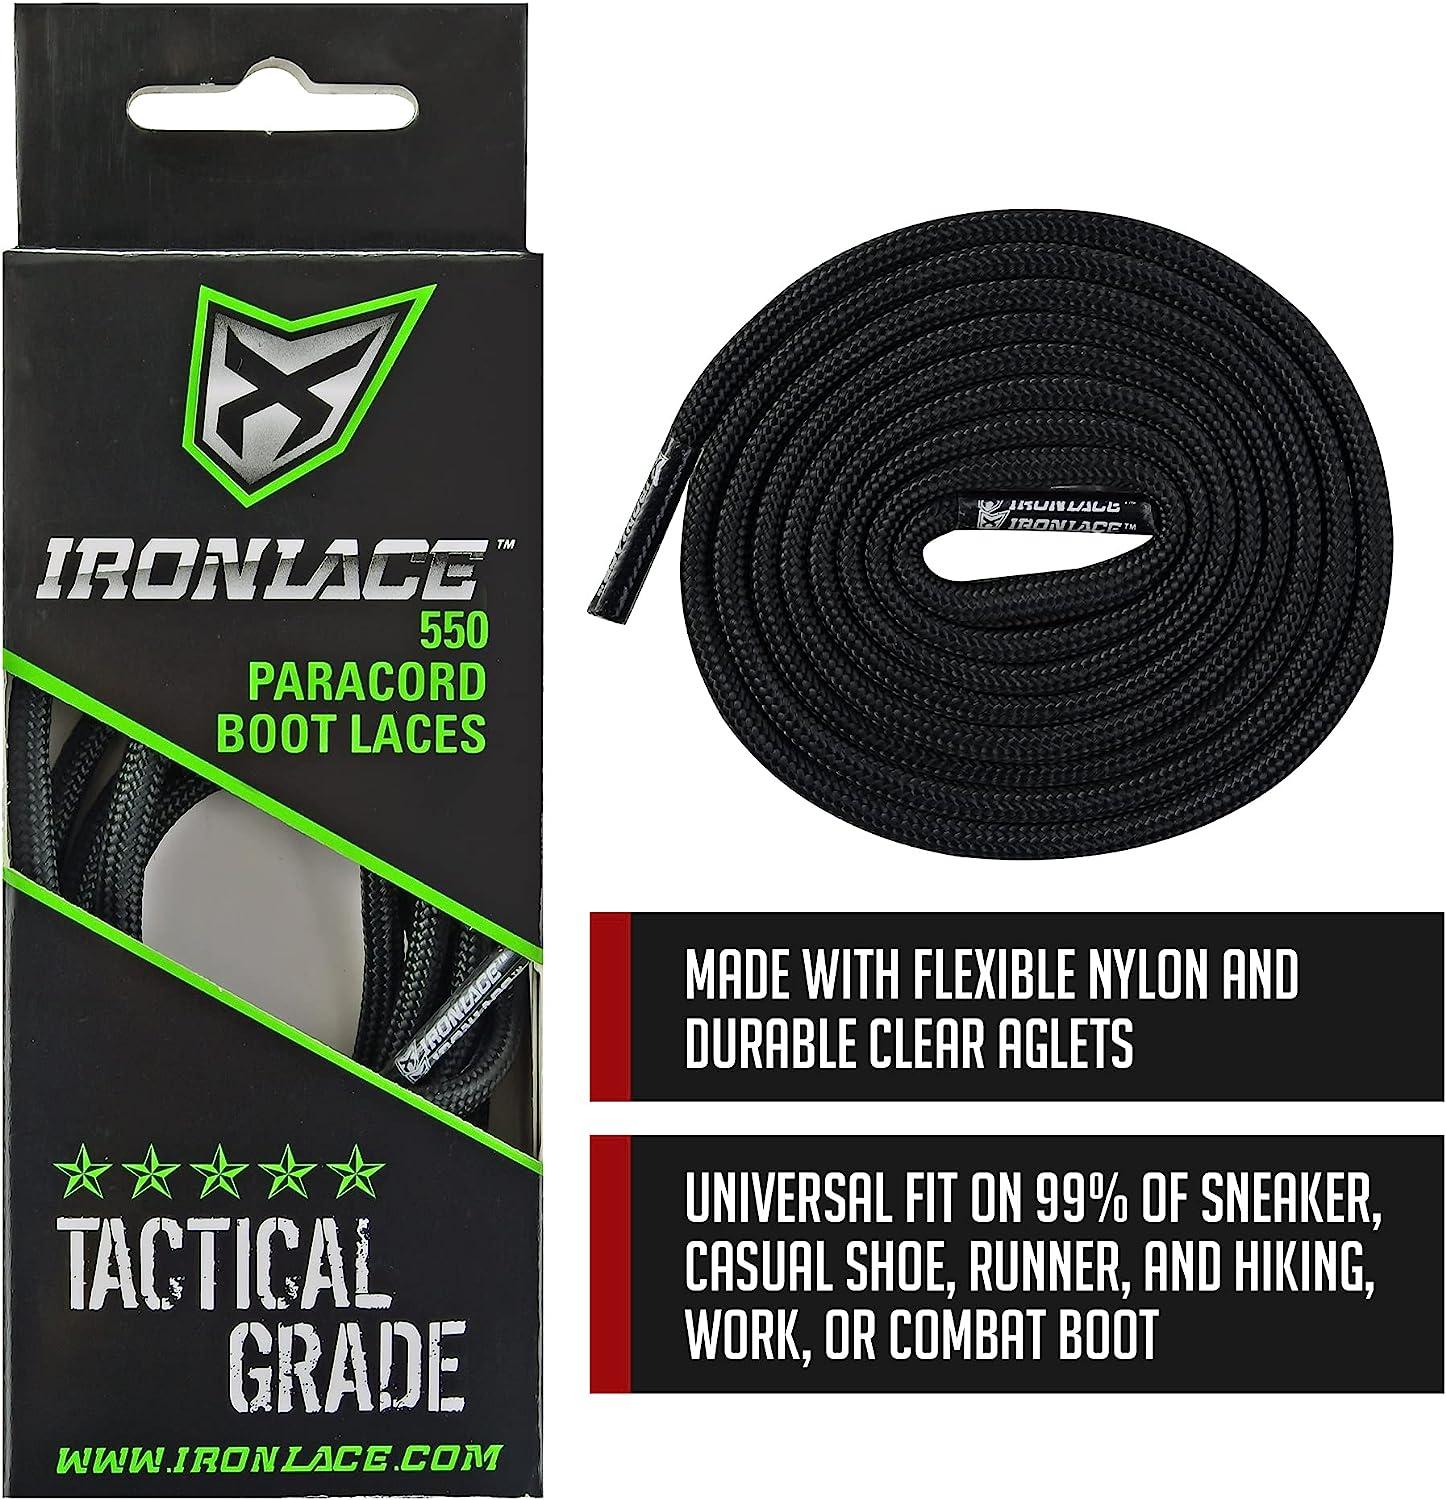 Ironlace | Ironlace Paracord 550 Boot Laces and Shoelaces